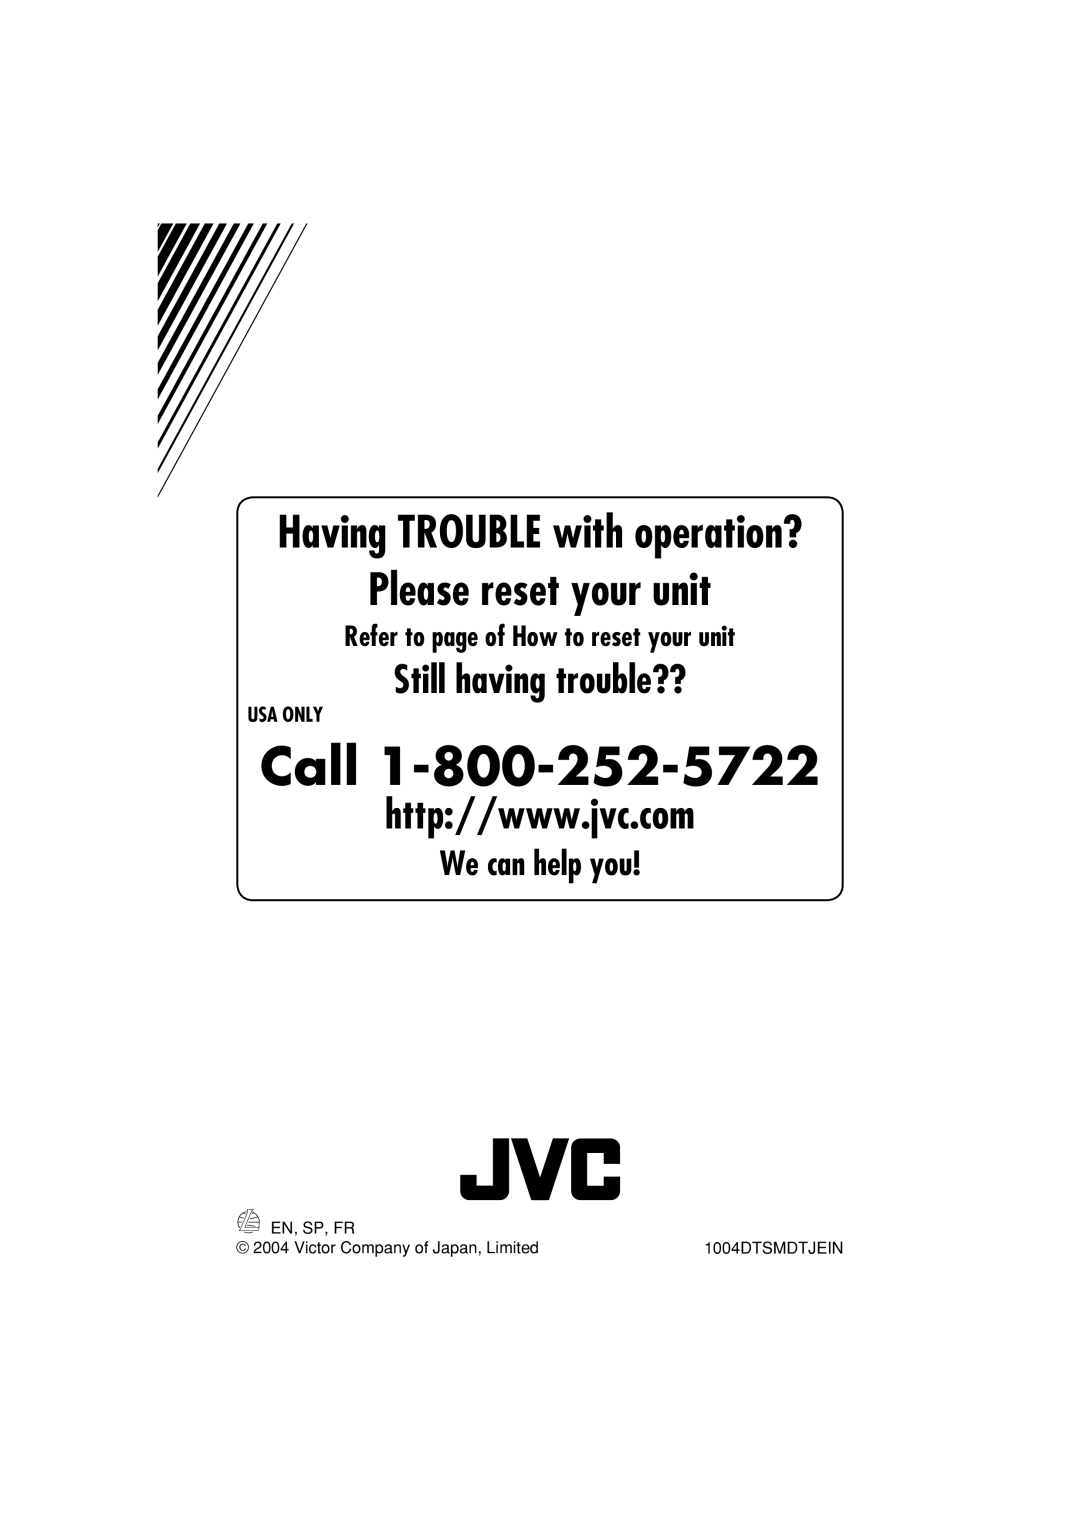 JVC KD-AR360, KD-G310 We can help you, Refer to page of How to reset your unit, Usa Only, Call, Please reset your unit 